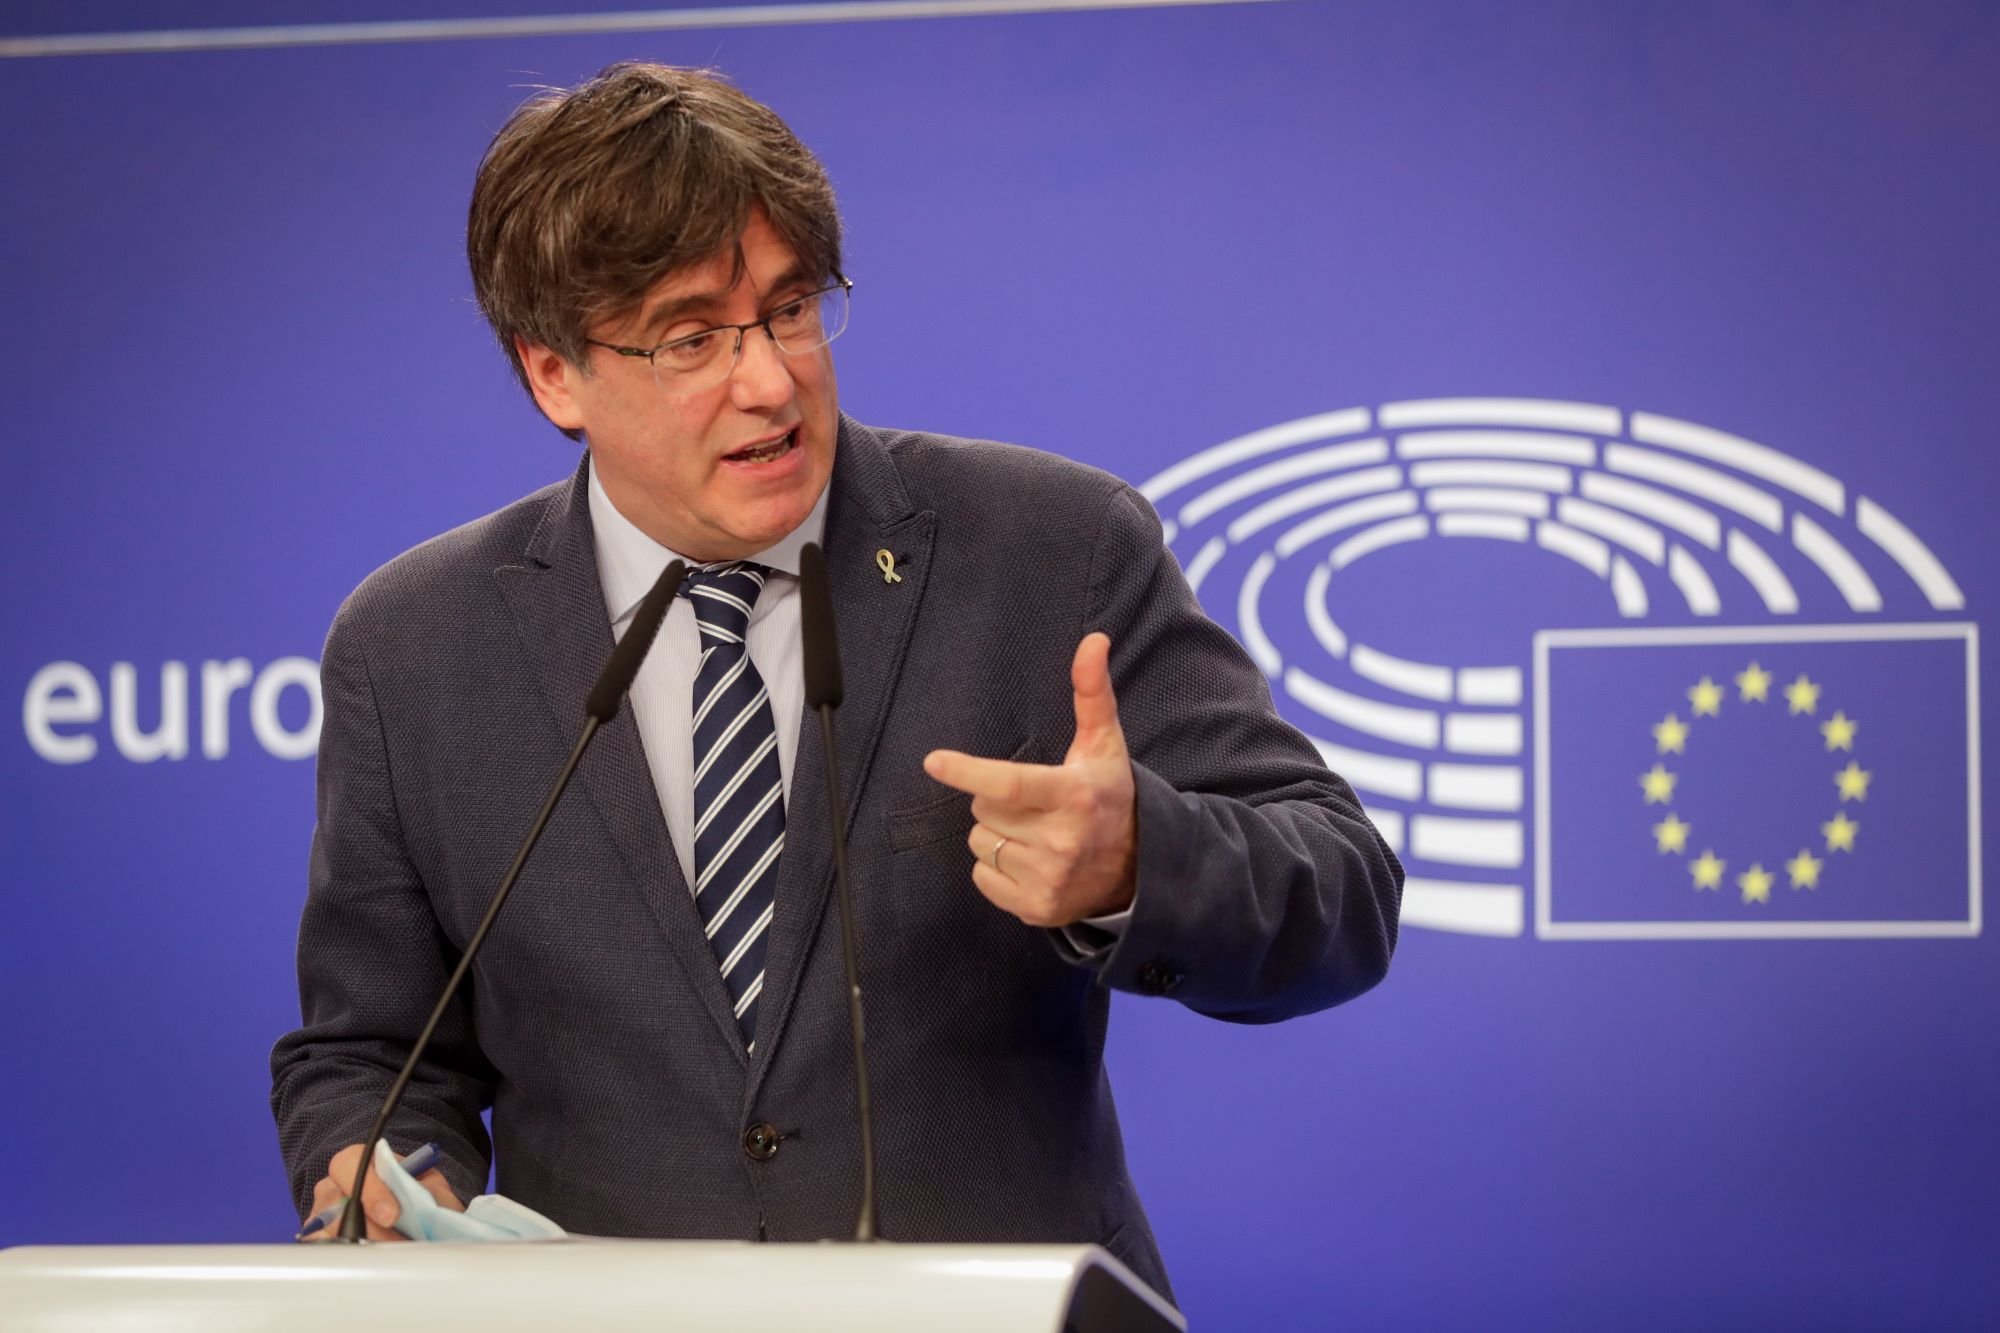 Puigdemont and the PP operation to stifle EU mediation on Catalonia in 2017